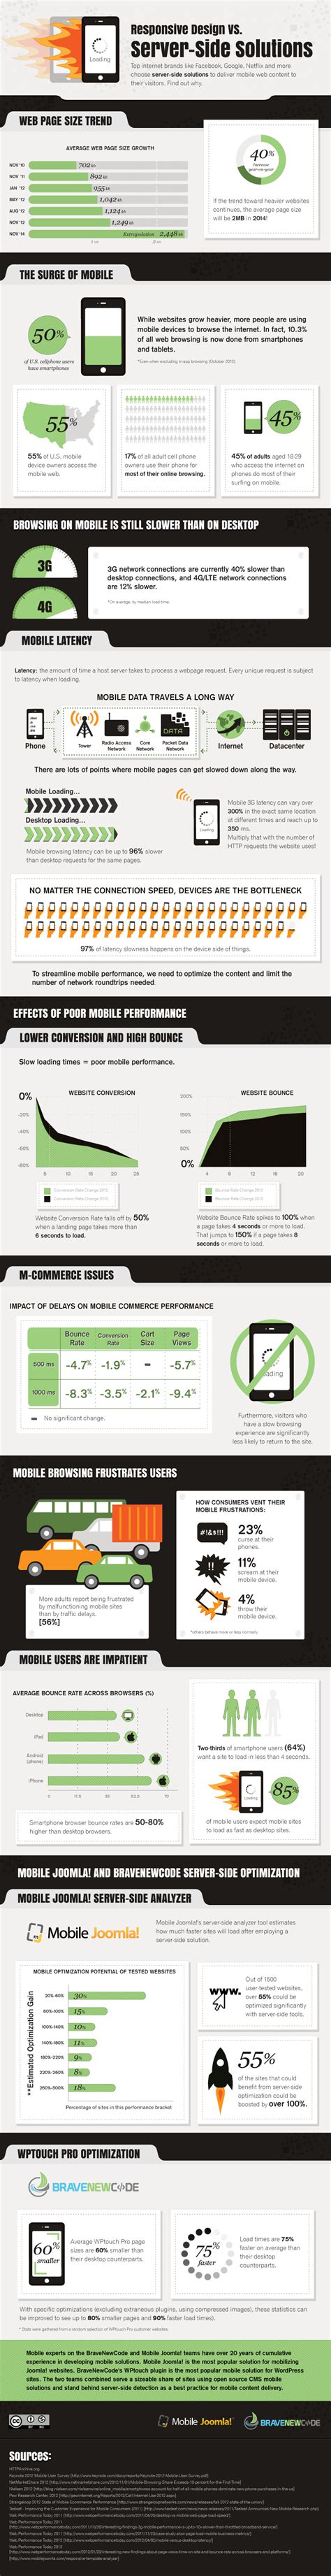 Responsive Design vs Mobile - is your site visible?